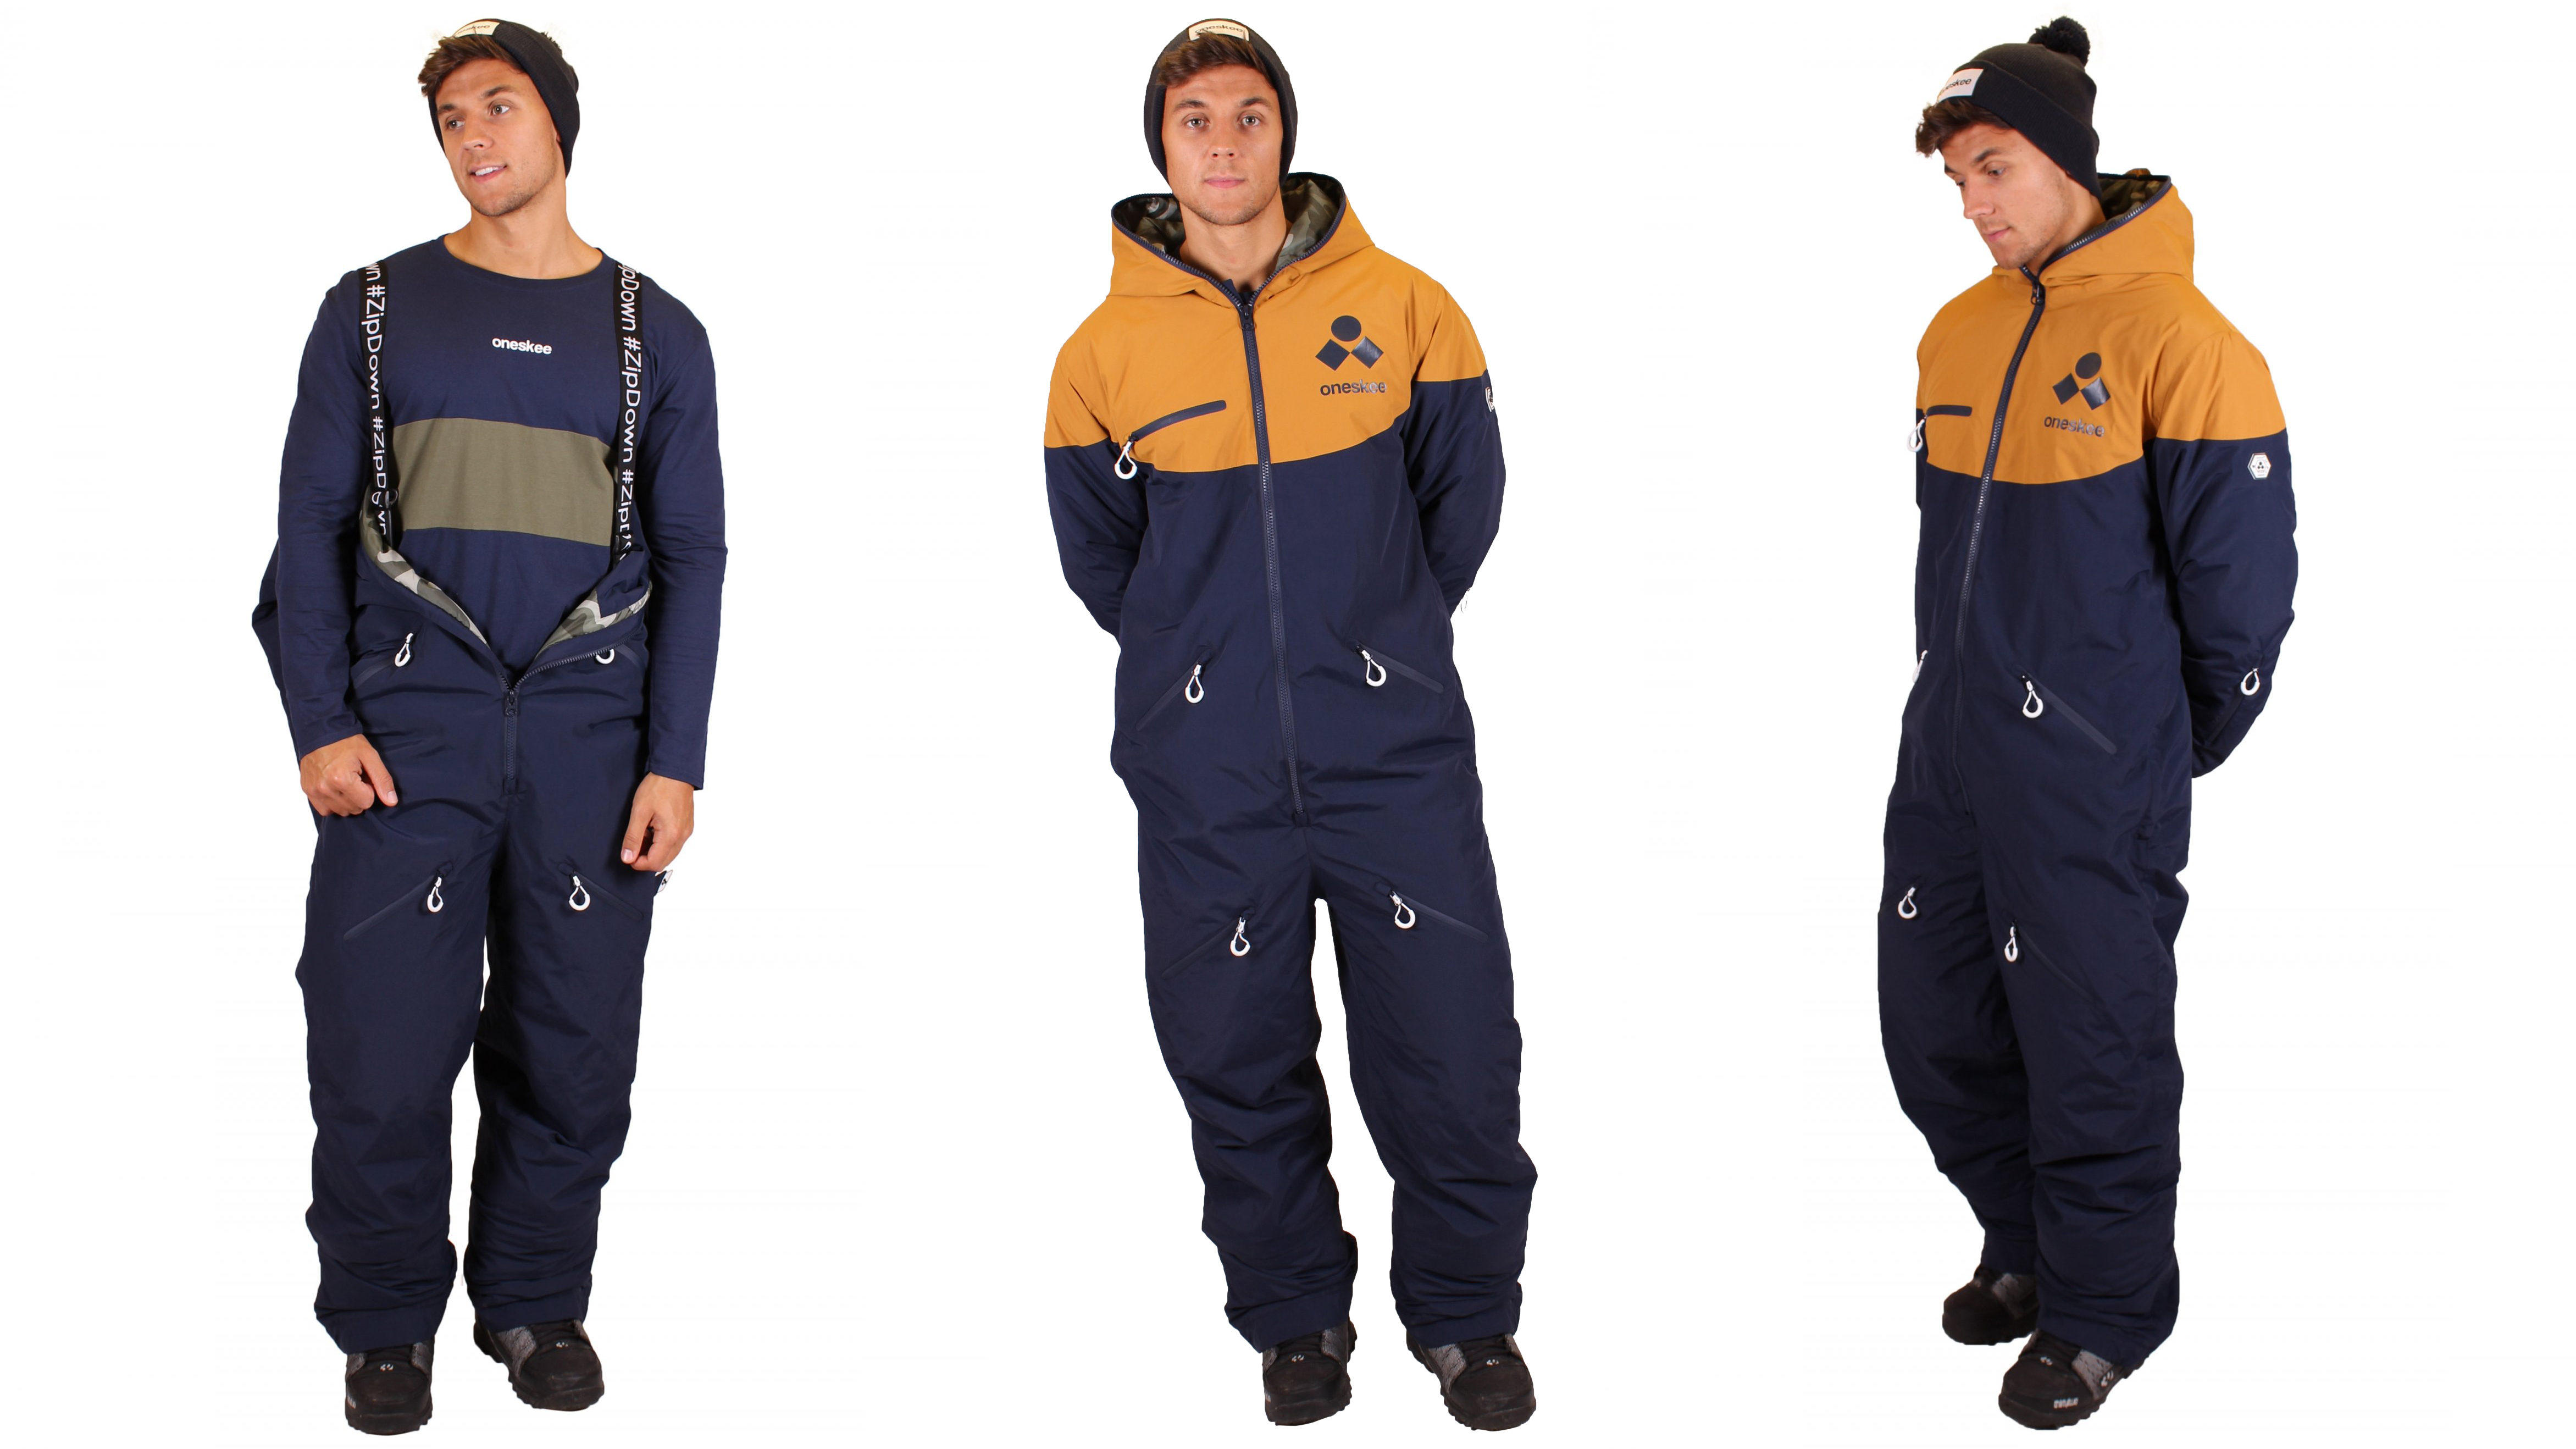 Oneskee's new Mark III range looks perfect for conquering your next  off-piste adventure